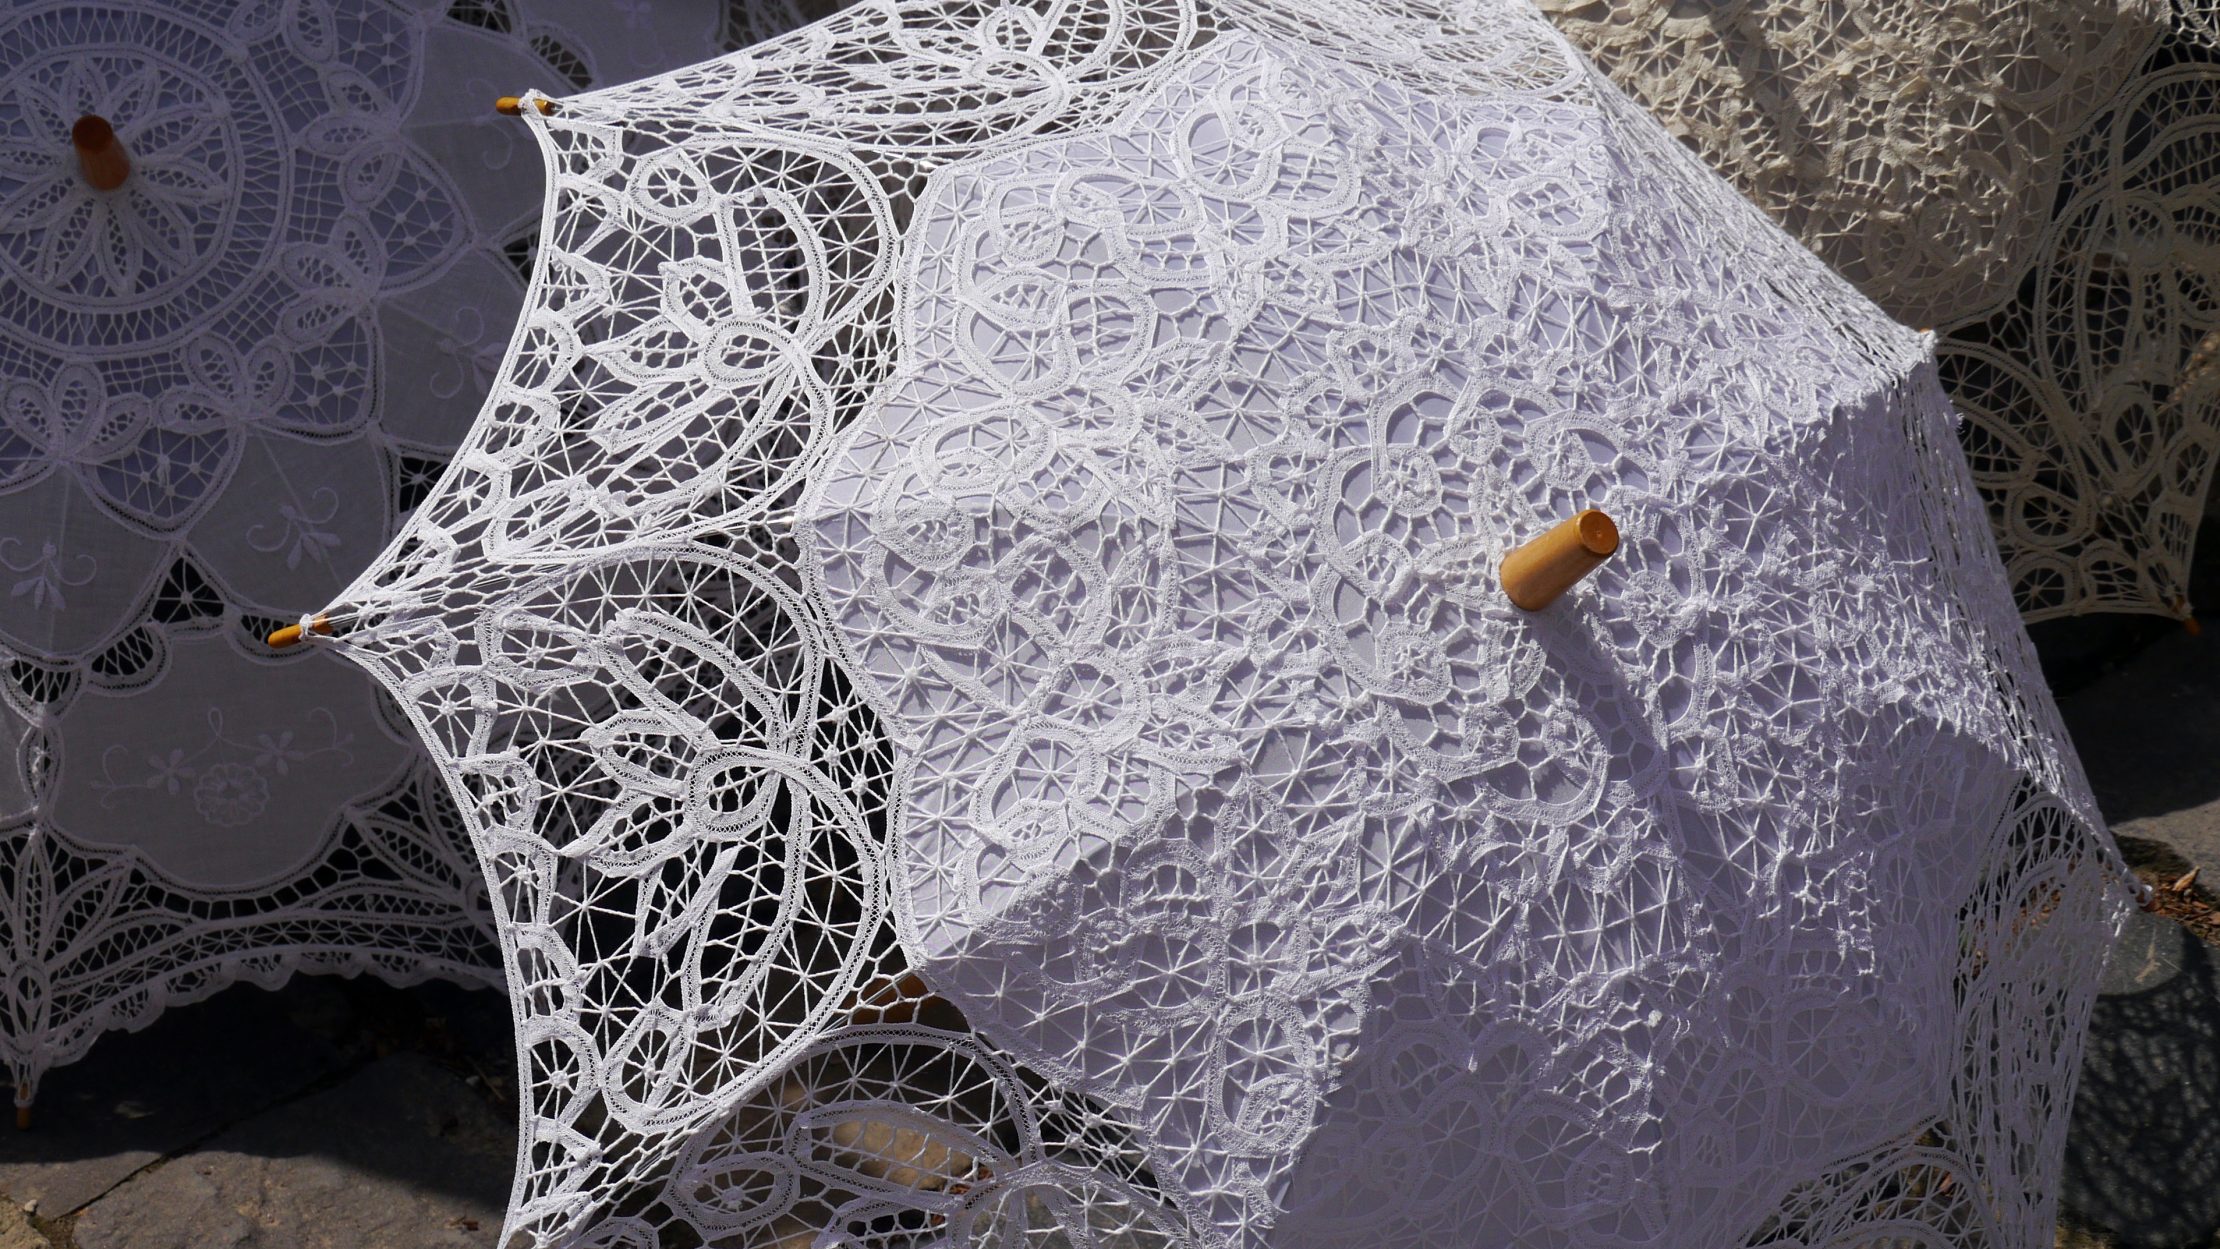 Burano lace from Venice